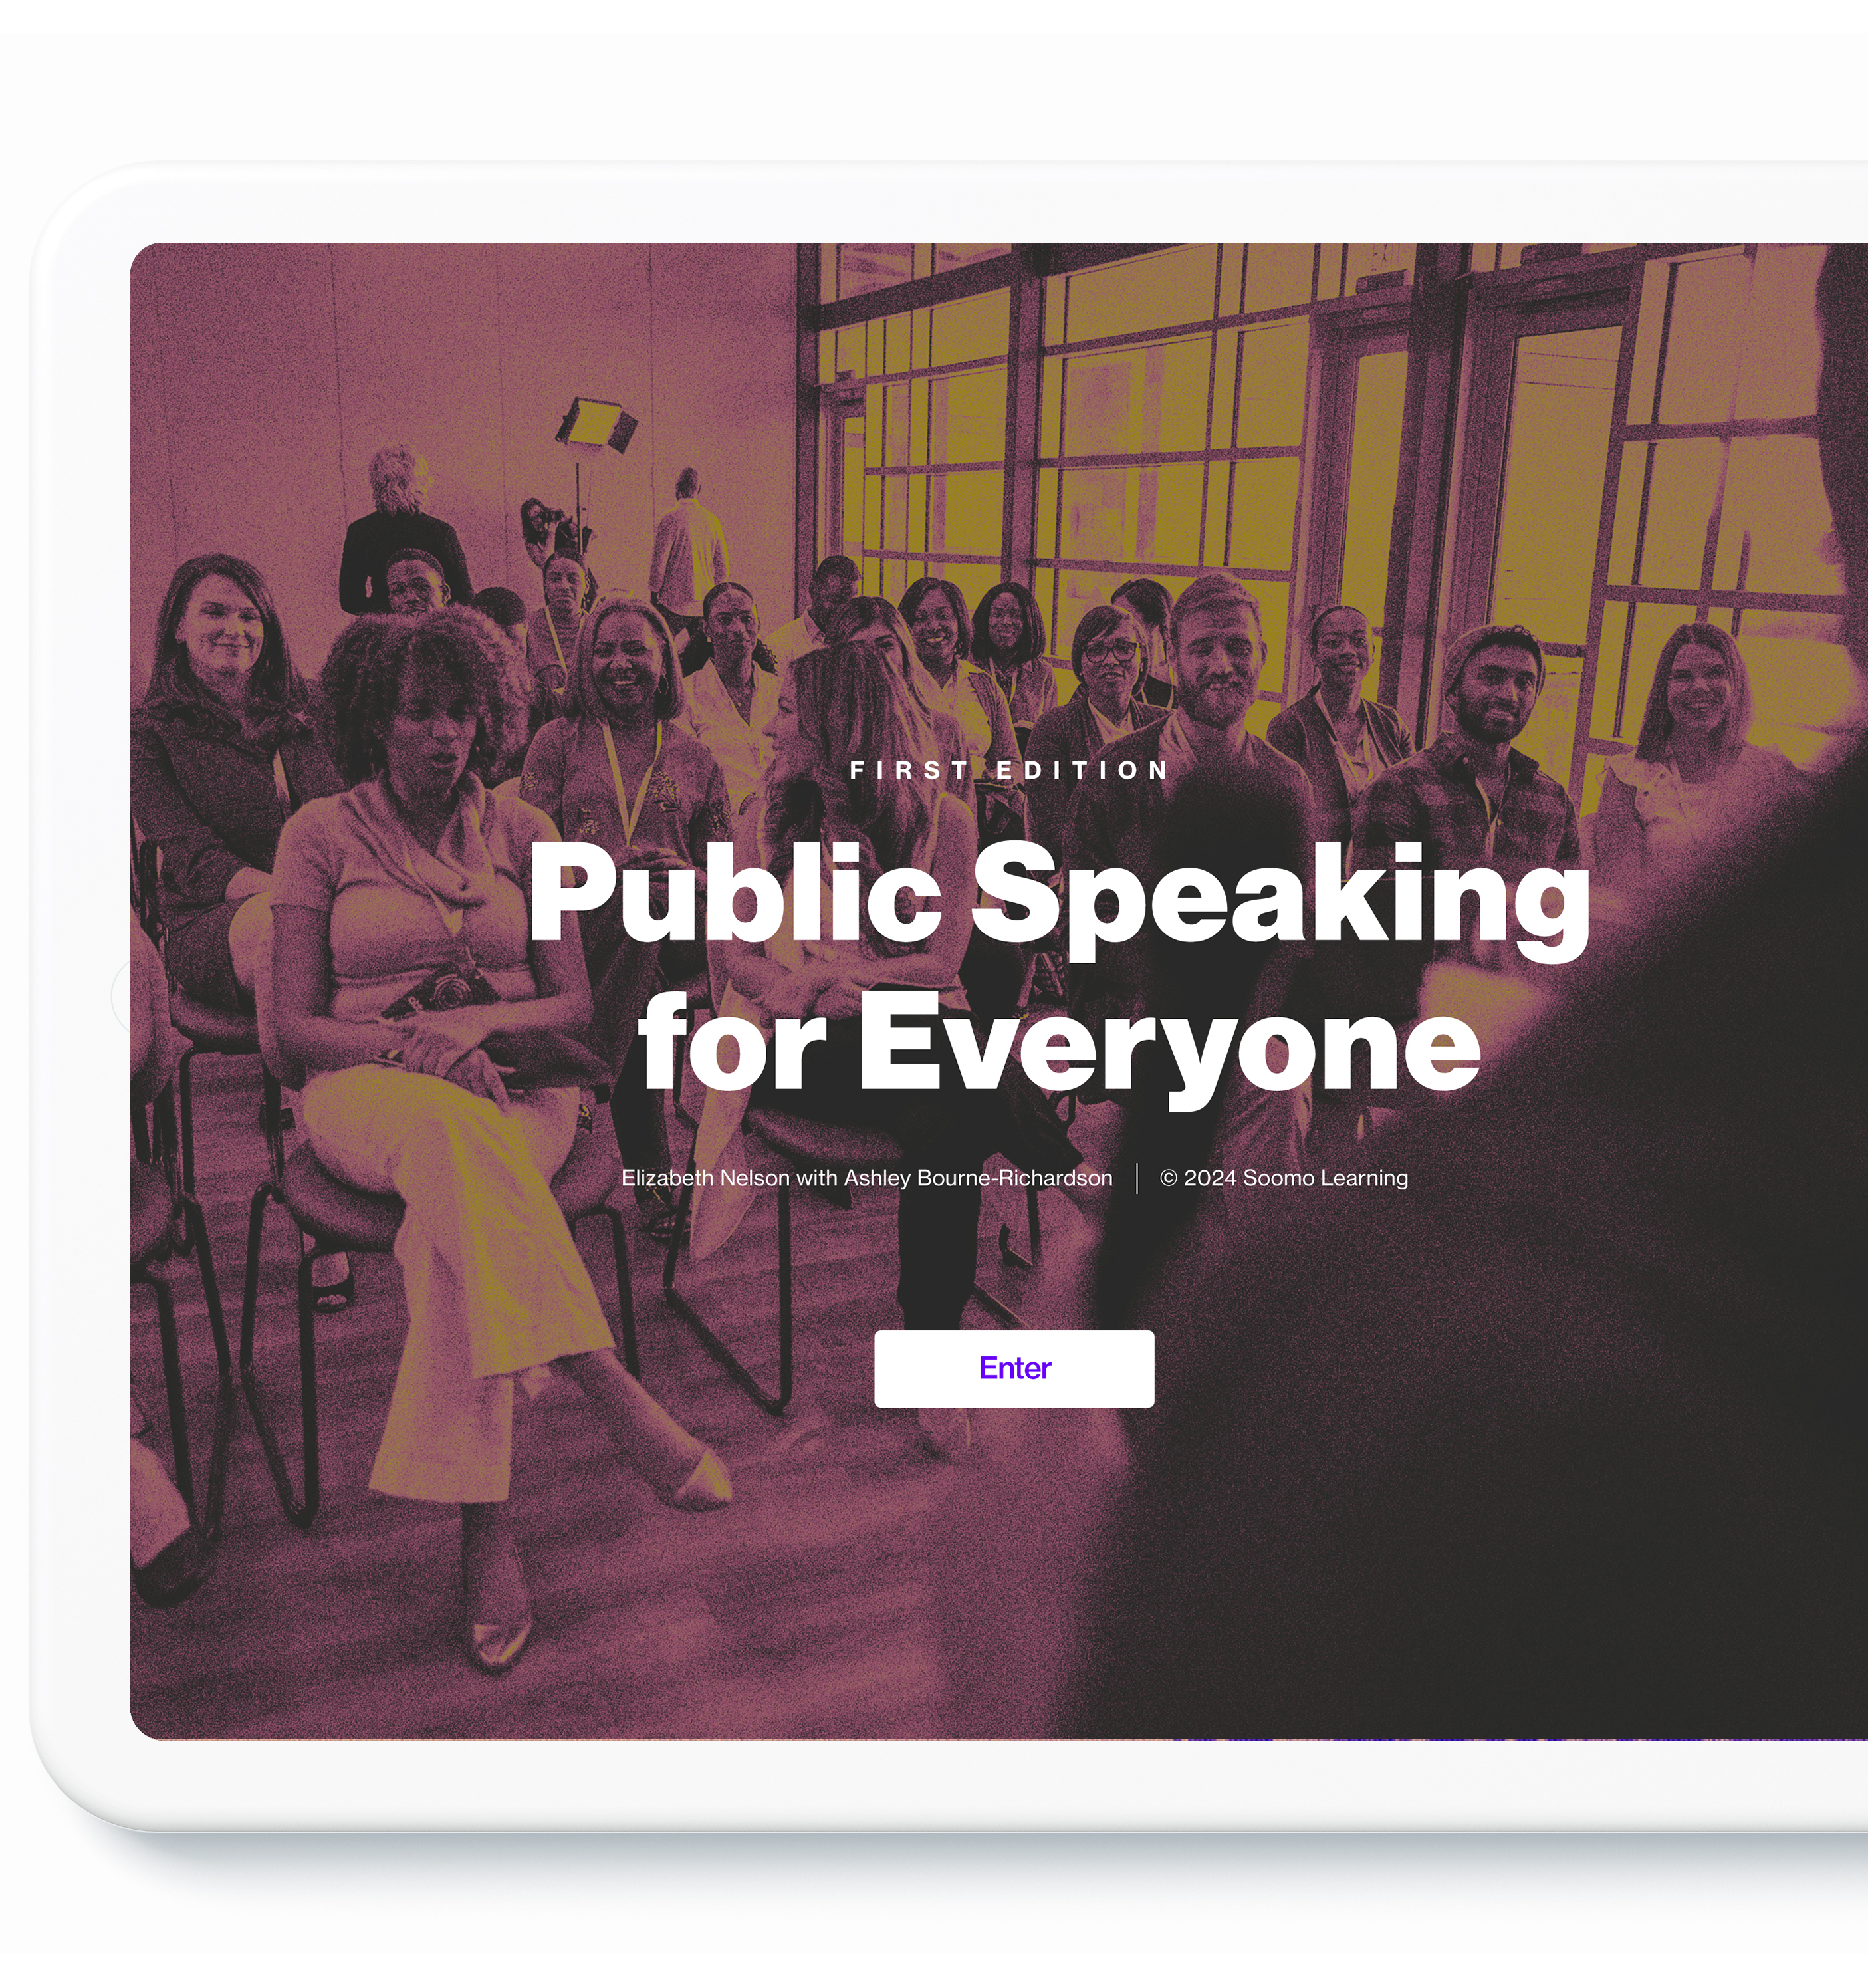 Public Speaking for Everyone webtext cover